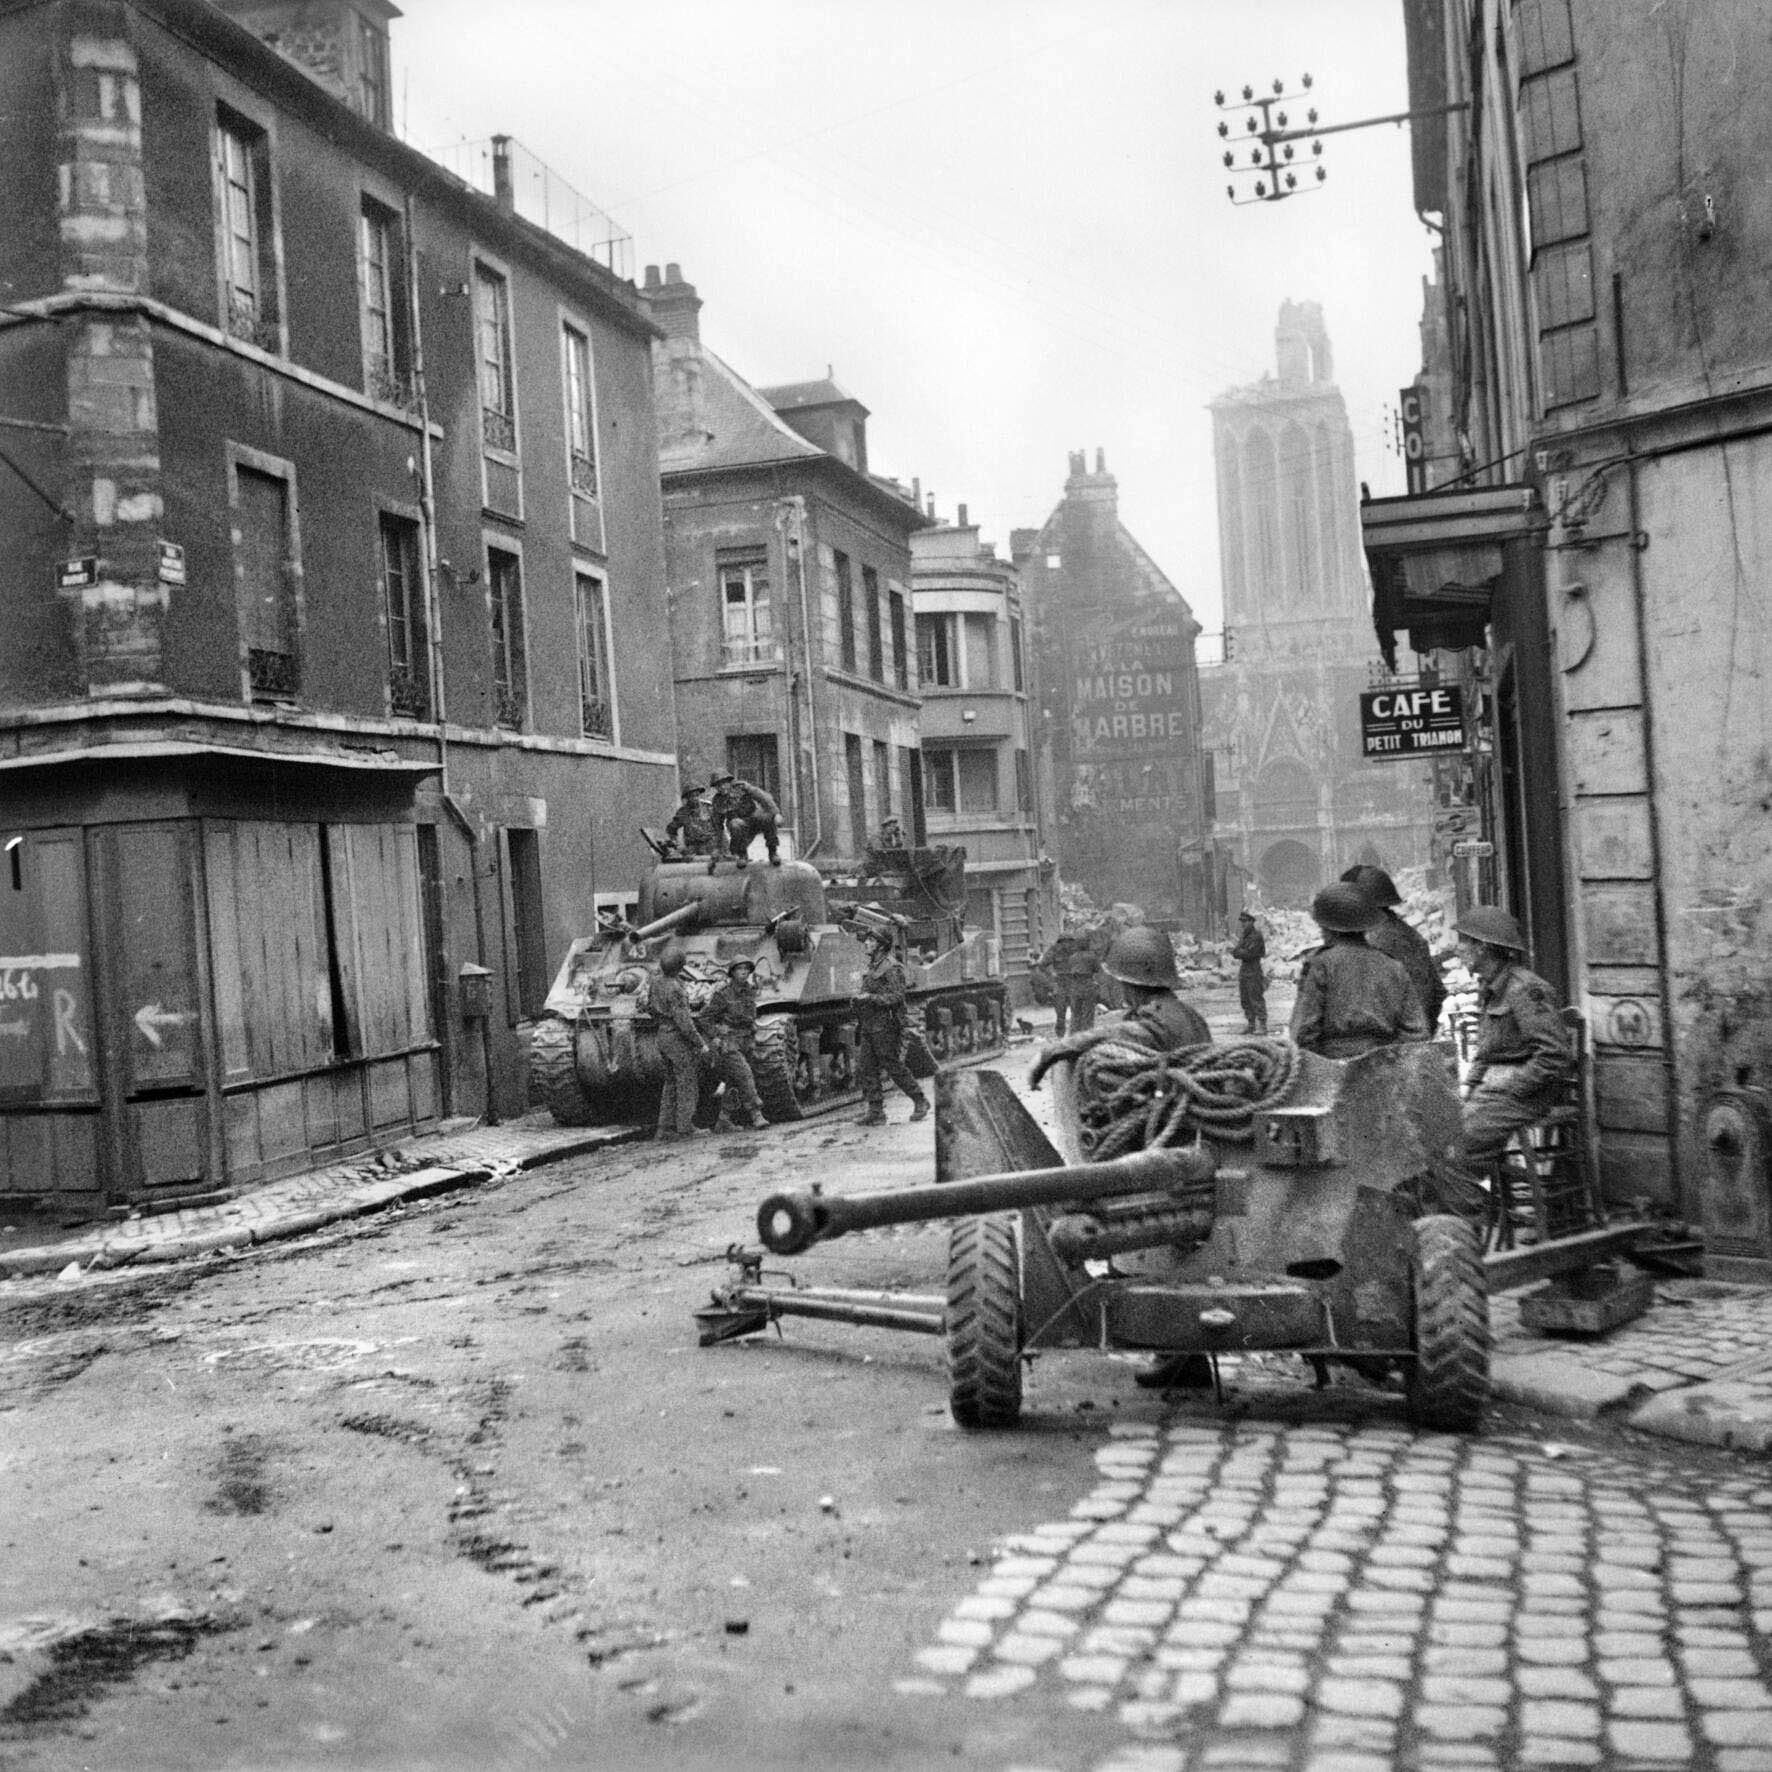 Sherman tanks and a 6-pounder anti-tank gun occupy a city street in Caen on July 10, 1944. After heavy bombing and numerous ground attacks, Caen finally fell to Allied forces weeks after D-Day.